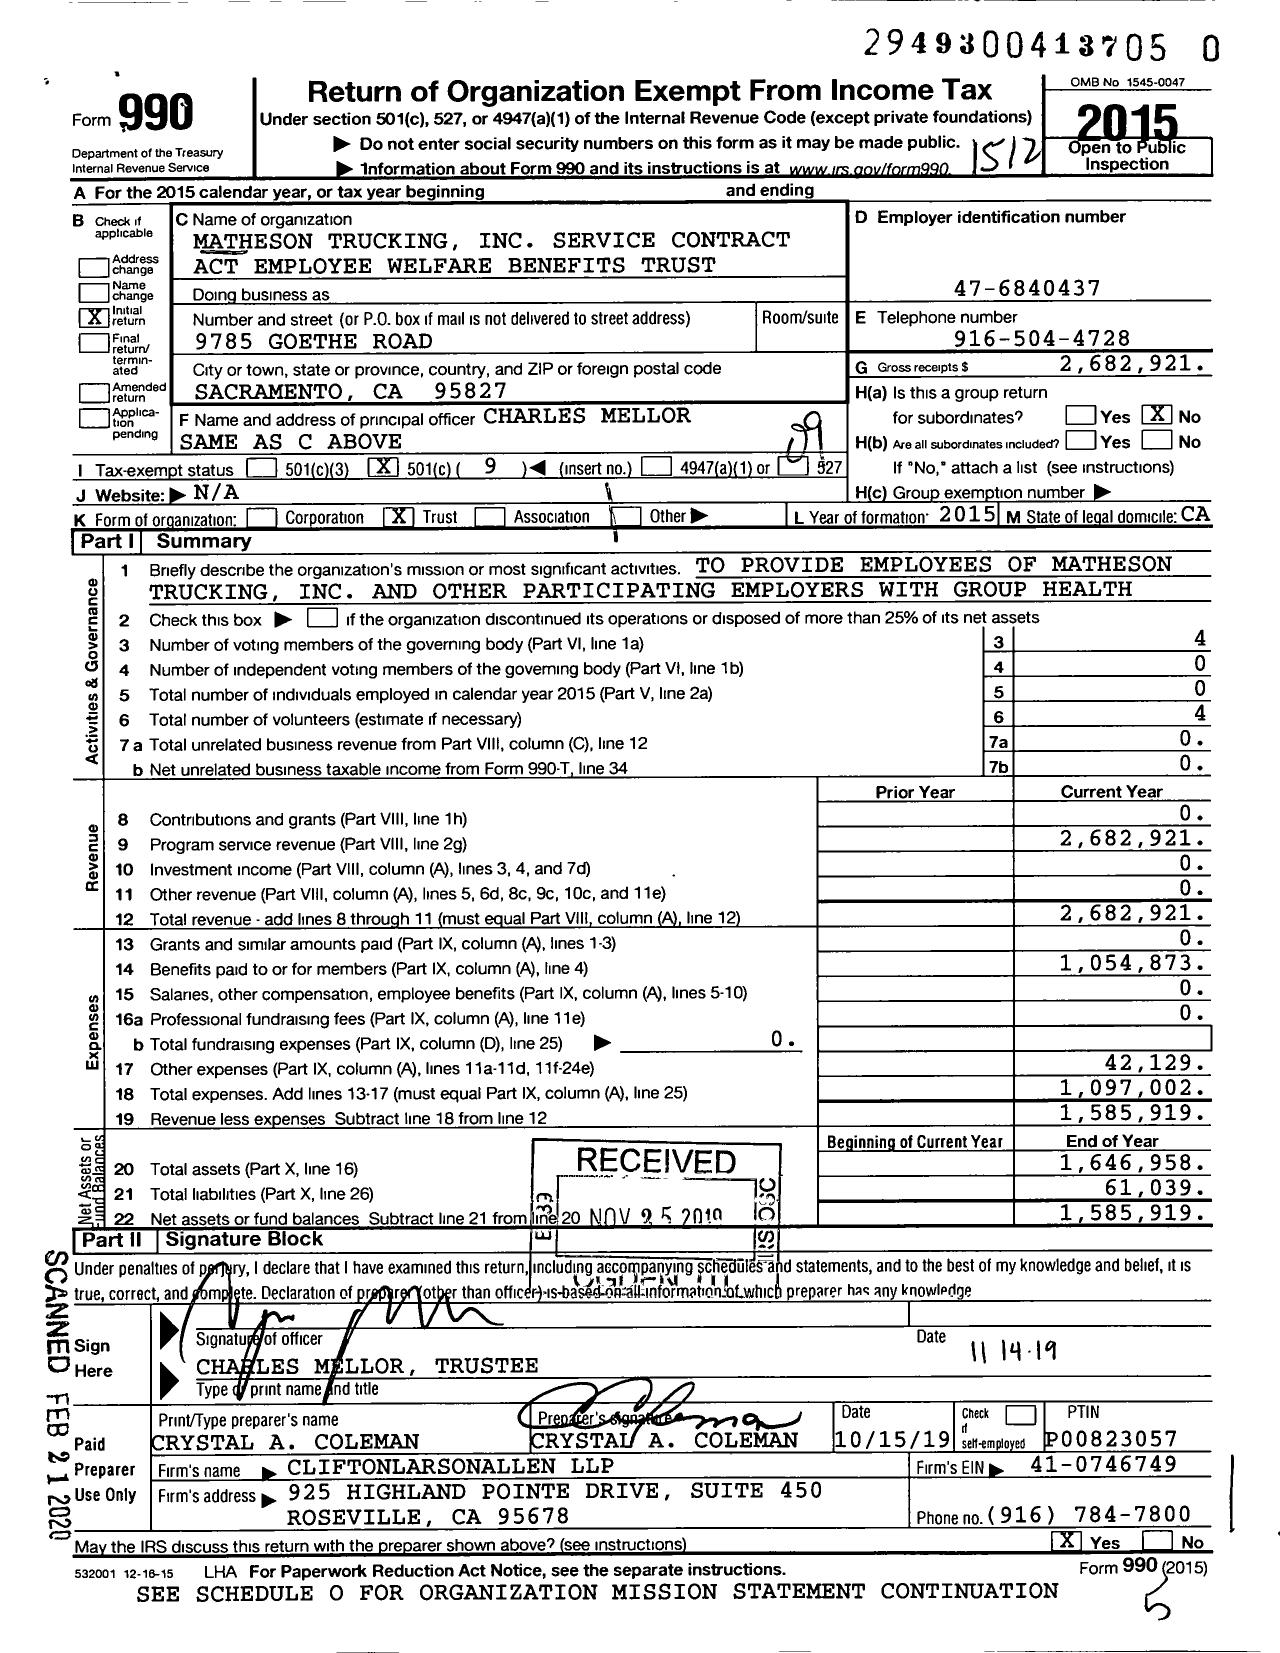 Image of first page of 2015 Form 990O for Matheson Trucking Service Contract Act Employee Welfare Benefits Trust